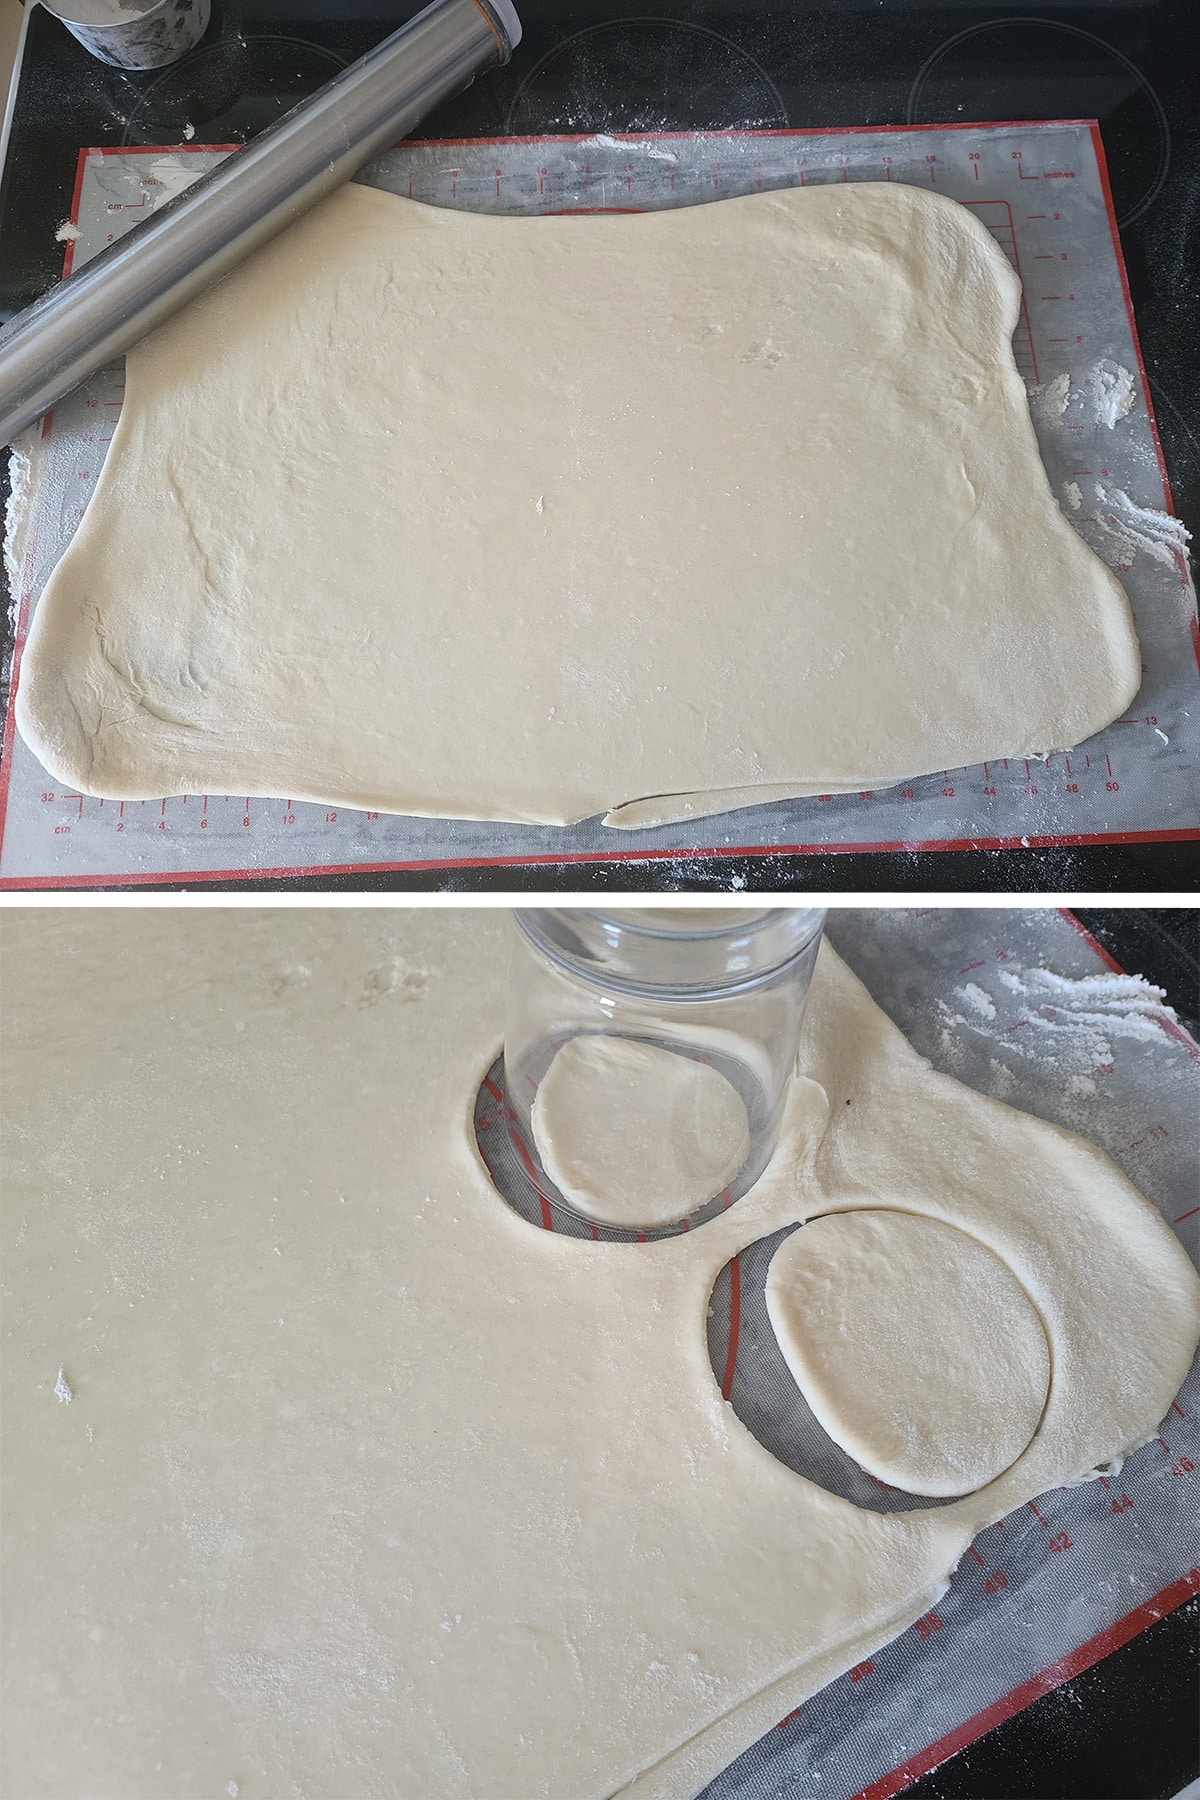 A two part image showing perogy dough rolled out and cut into rounds. The rounds shrink considerably from the cutting.